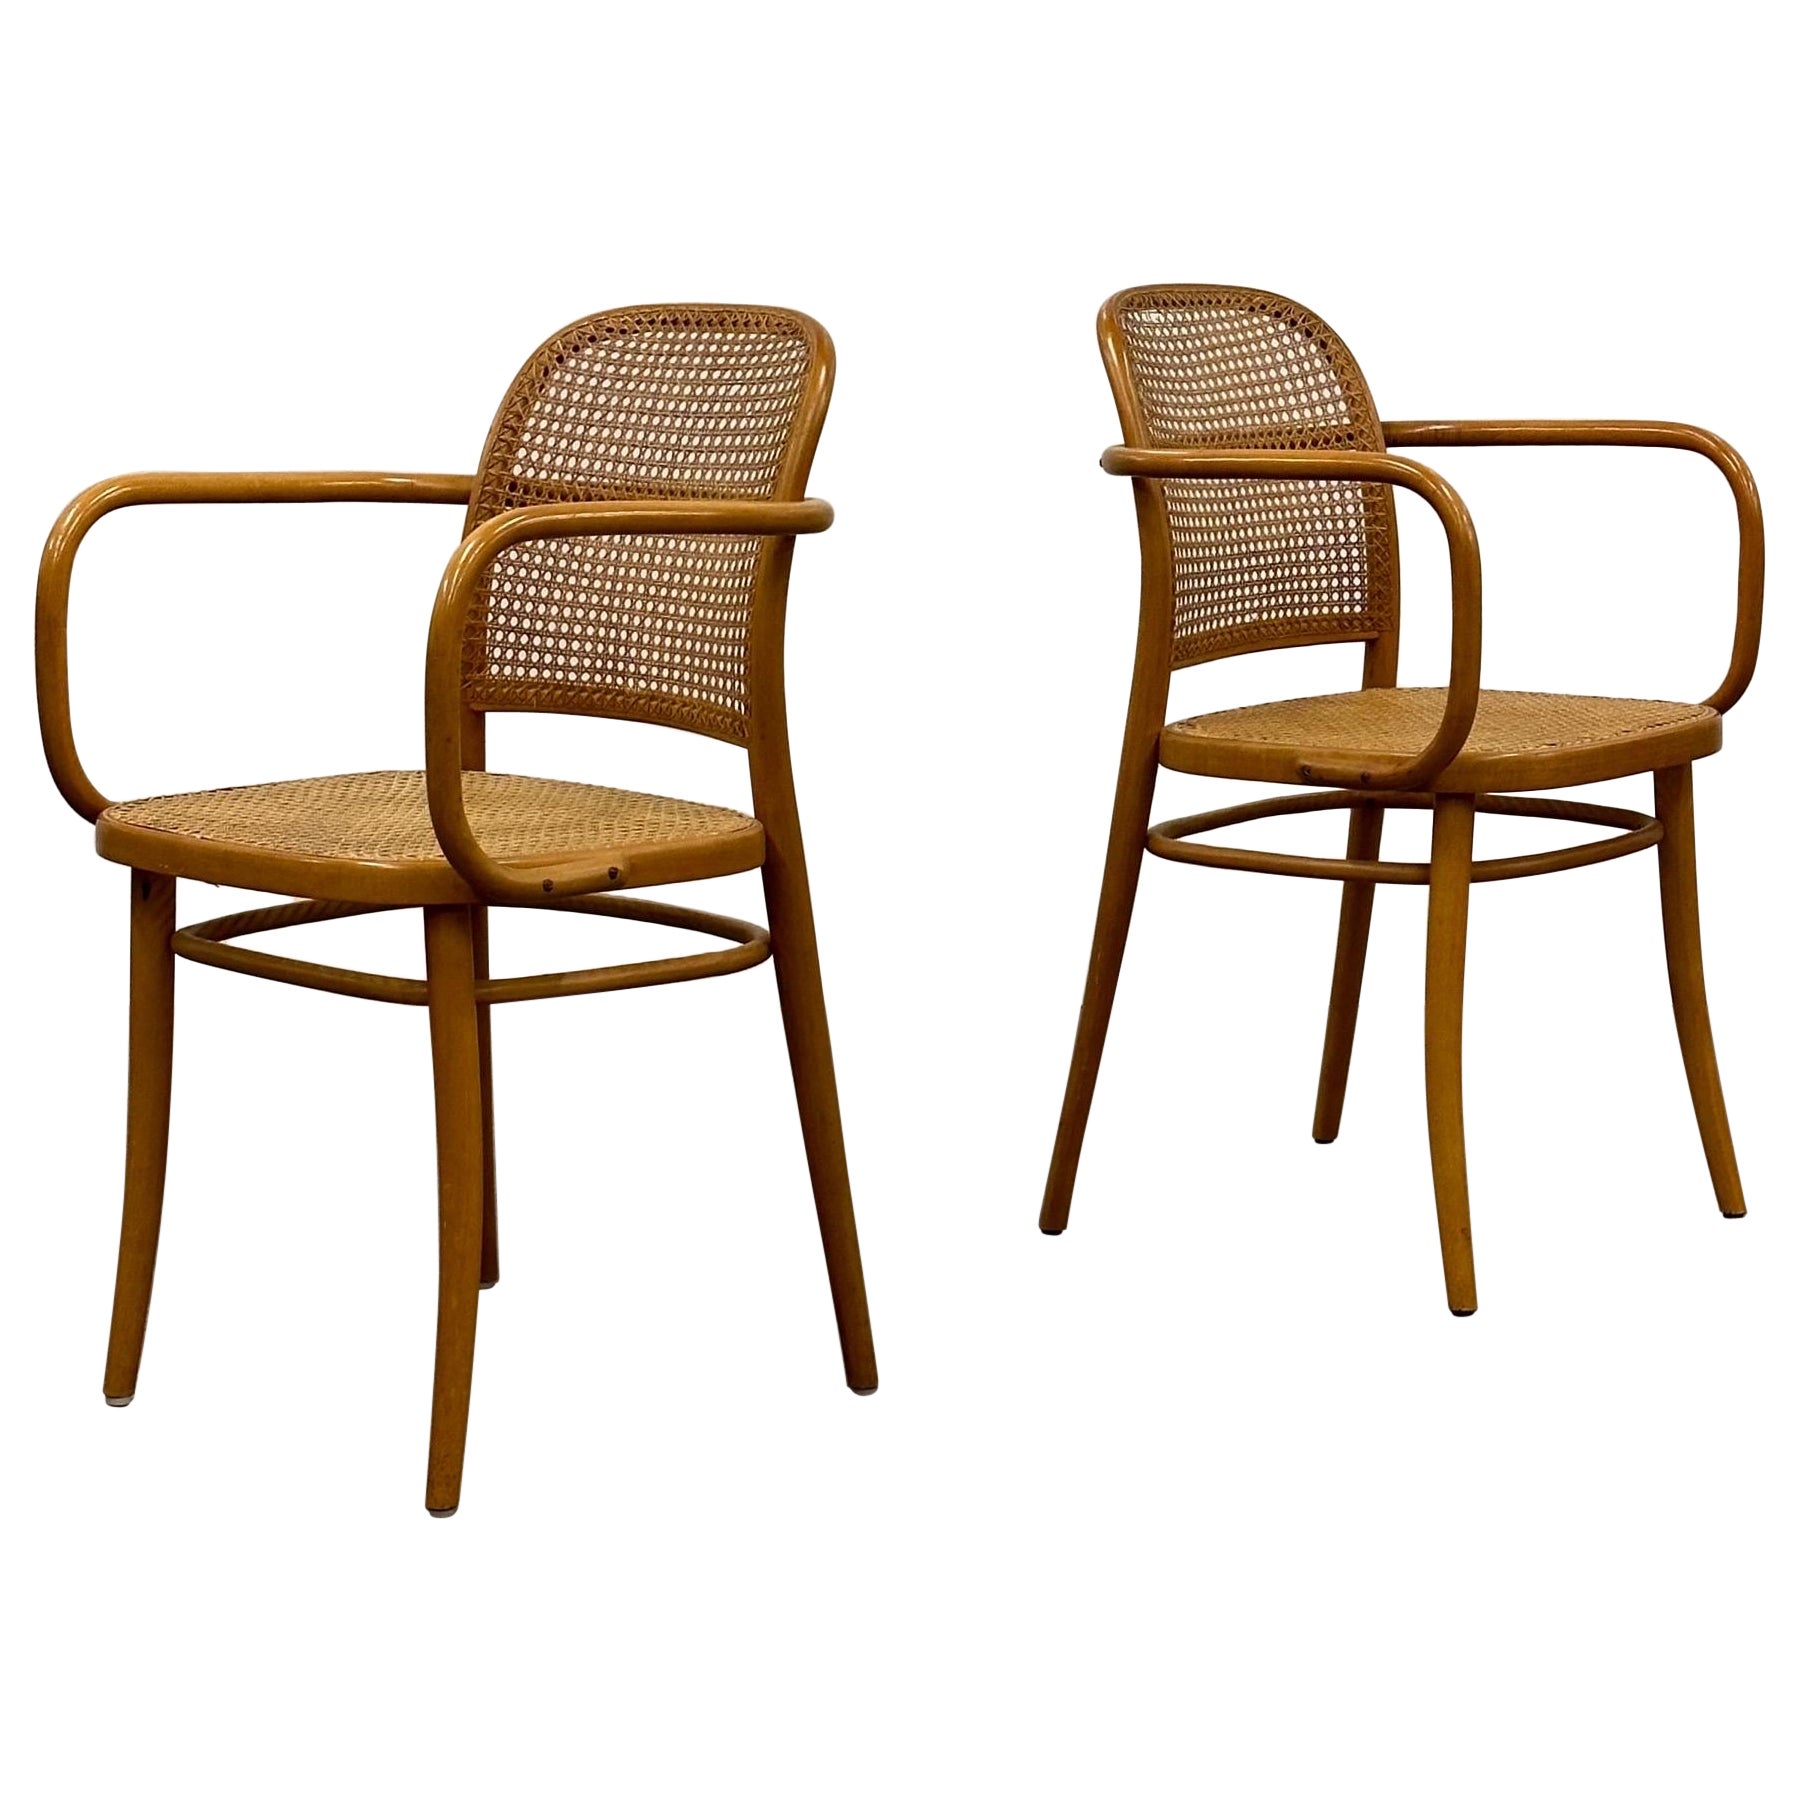 No.811 “Prague” Chairs by Josef Hoffman for Thonet For Sale